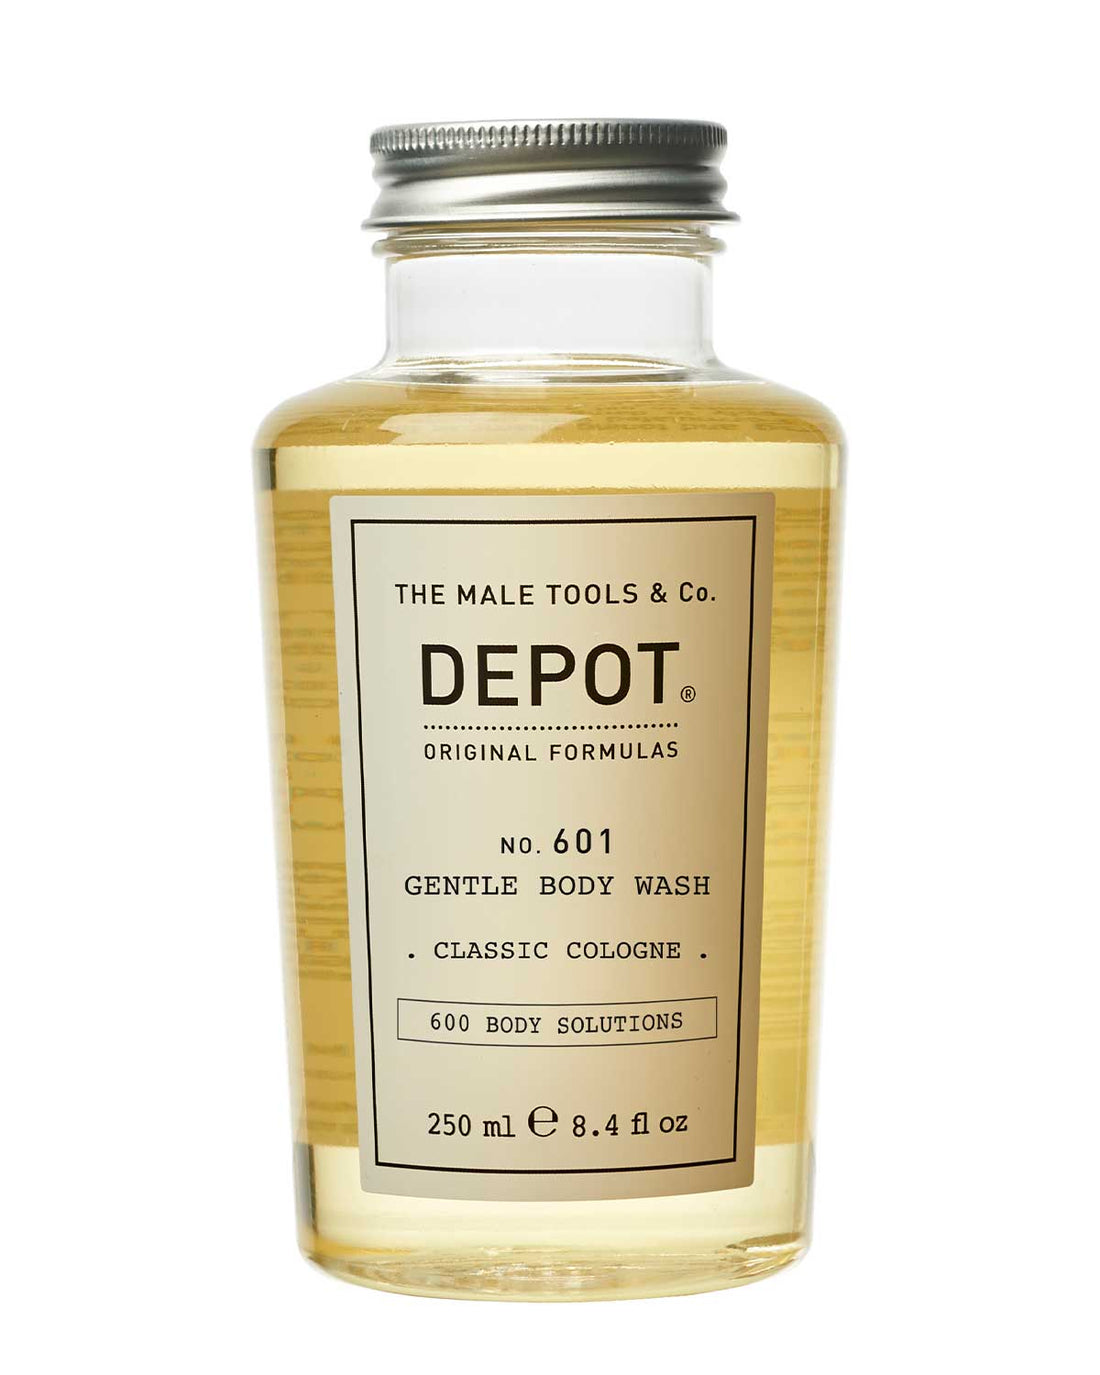 depot-gentle-body-wash-classic-cologne-250-ml